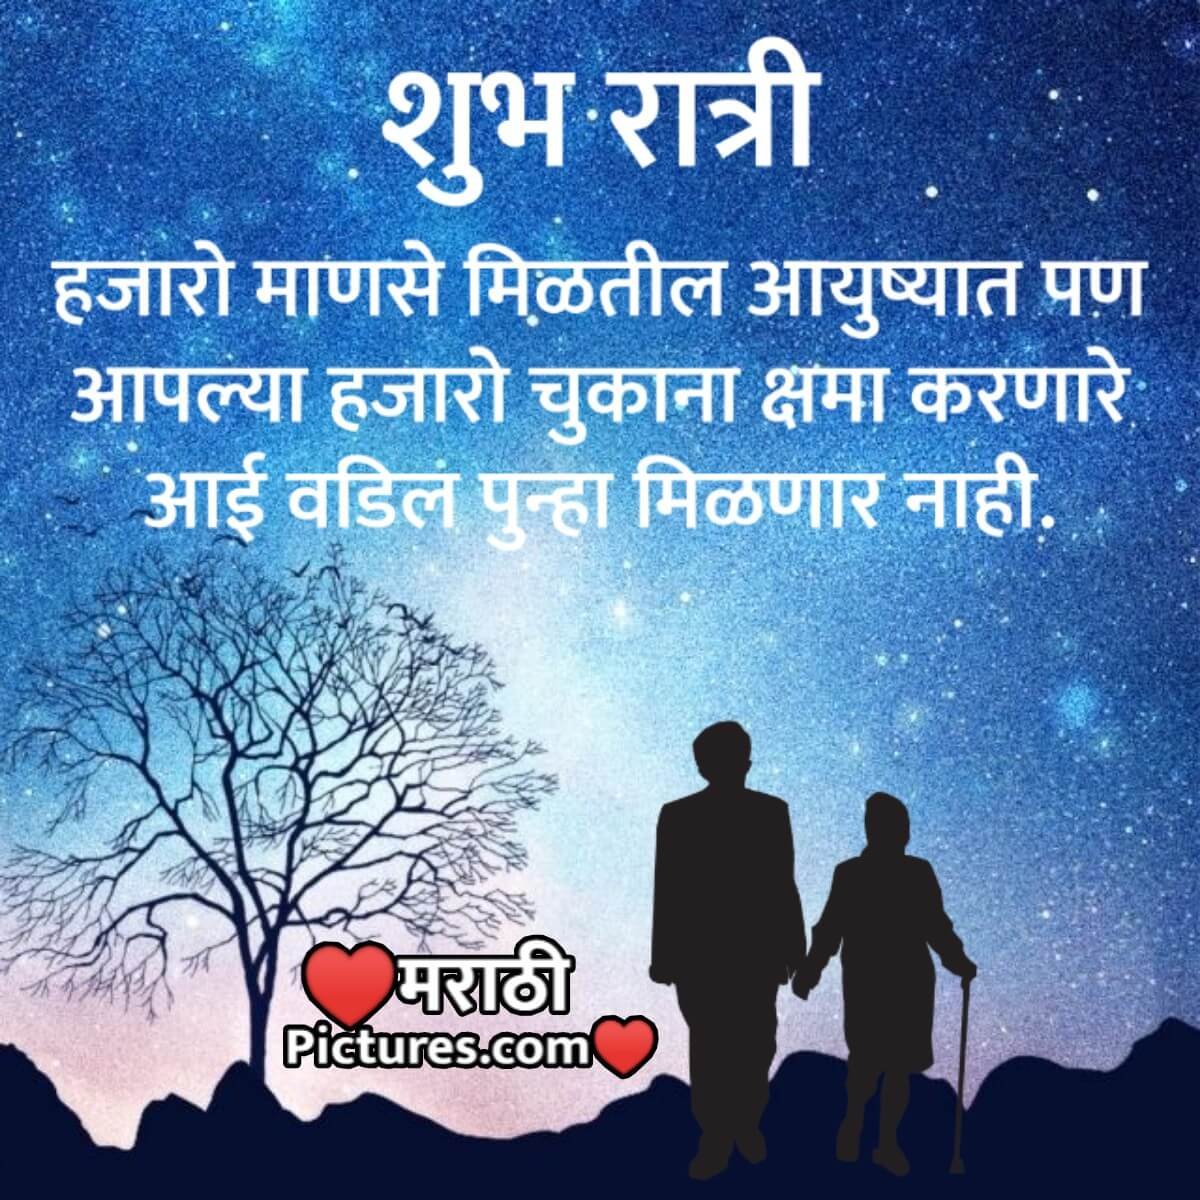 Shubh Ratri Aayi Vadil Quote